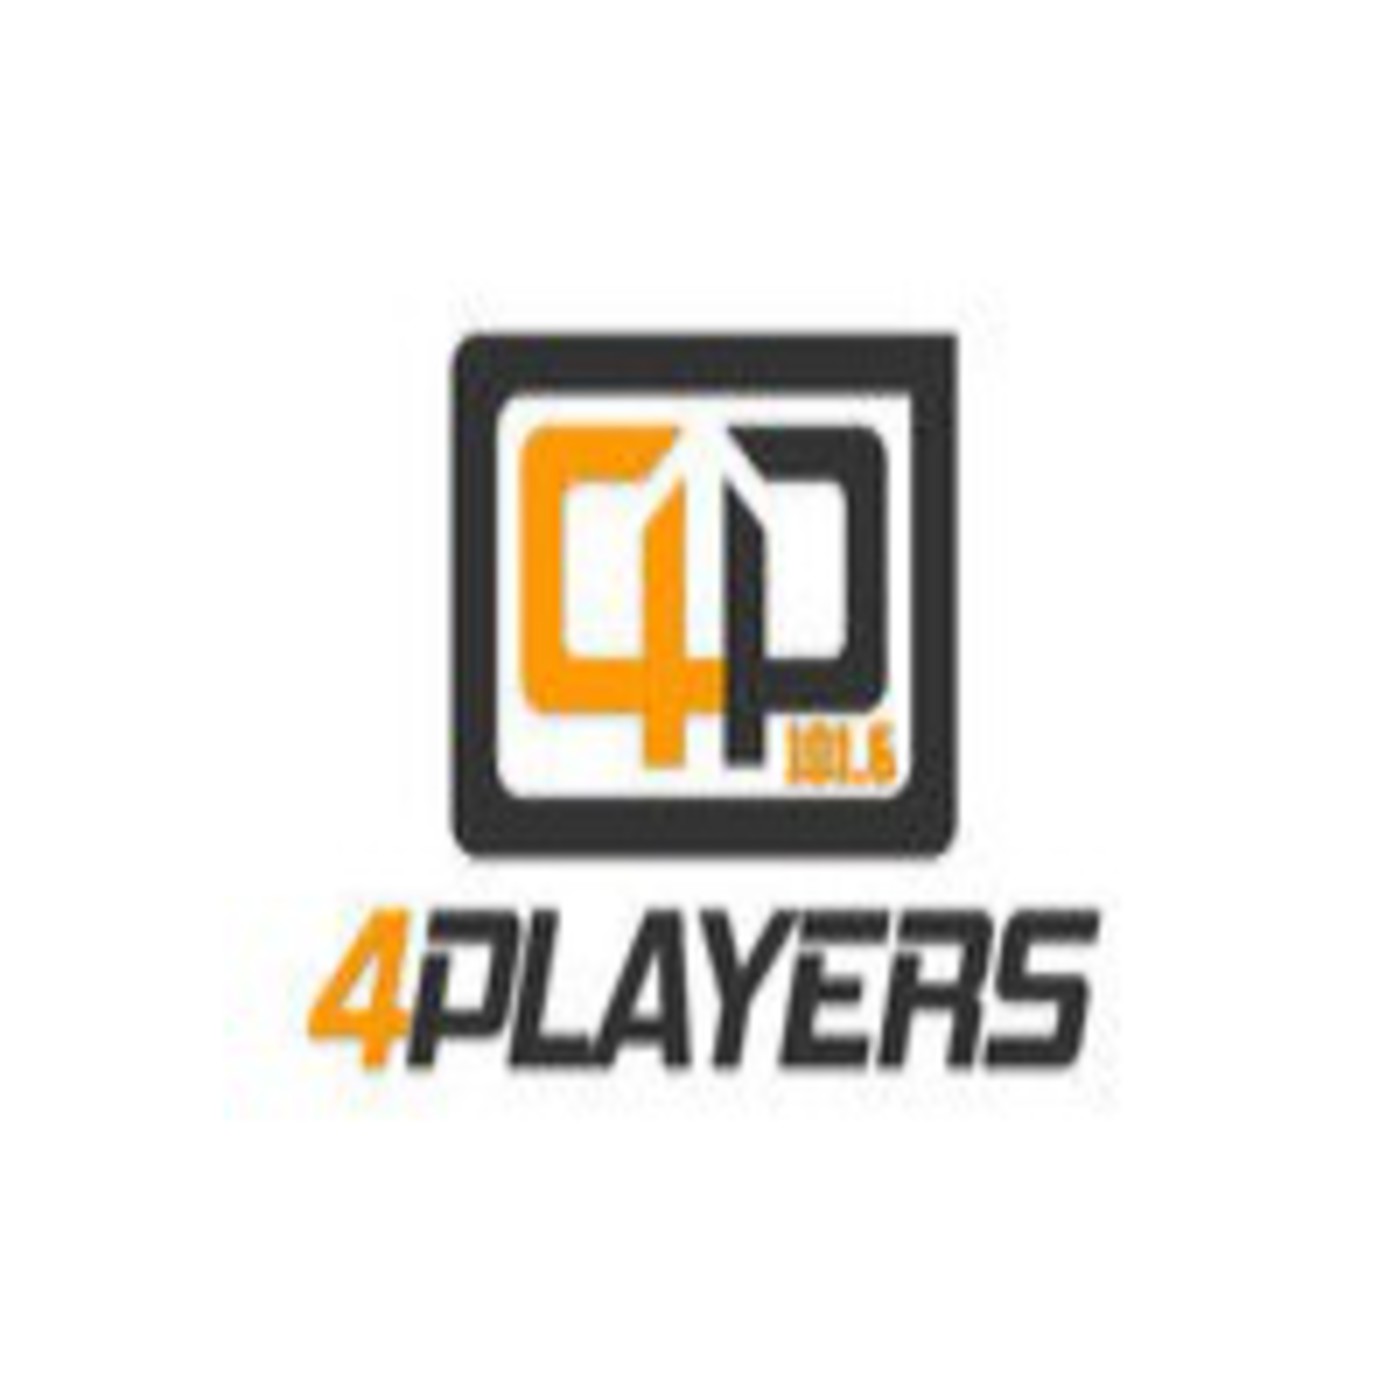 Podcast 4players